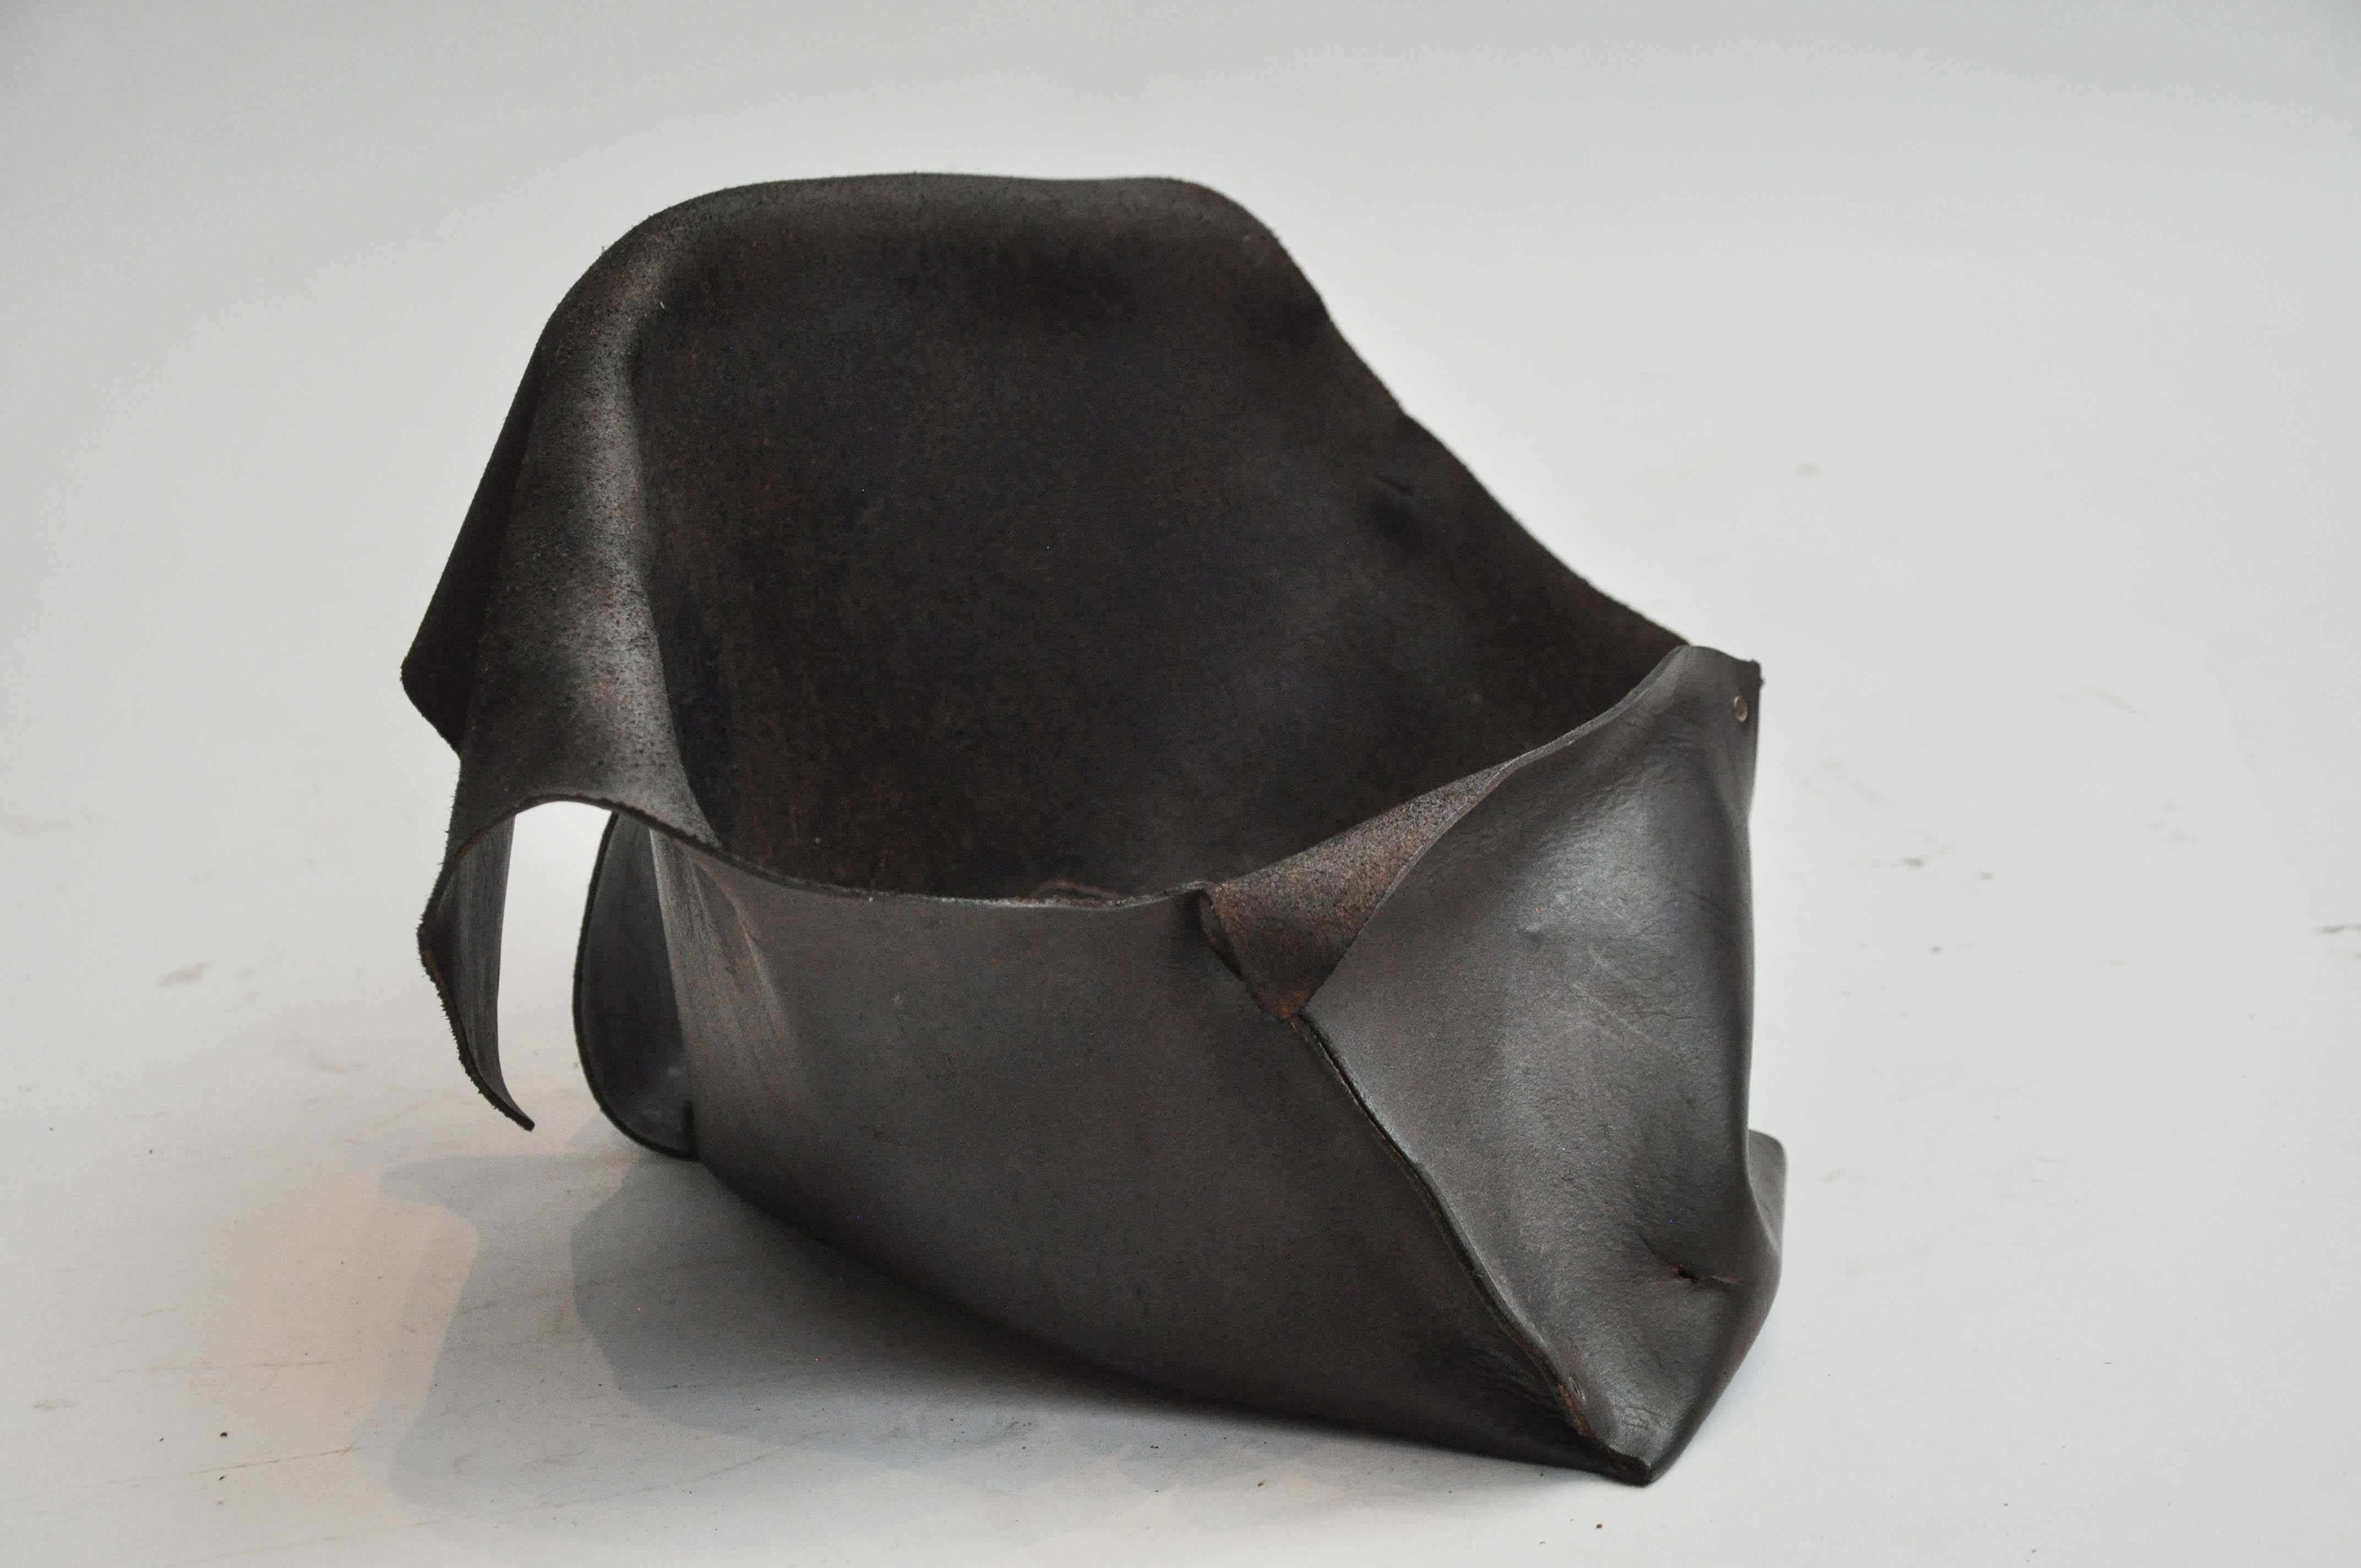 Contemporary 21st Century Studded Leather Vessel by Marla Wallerstein